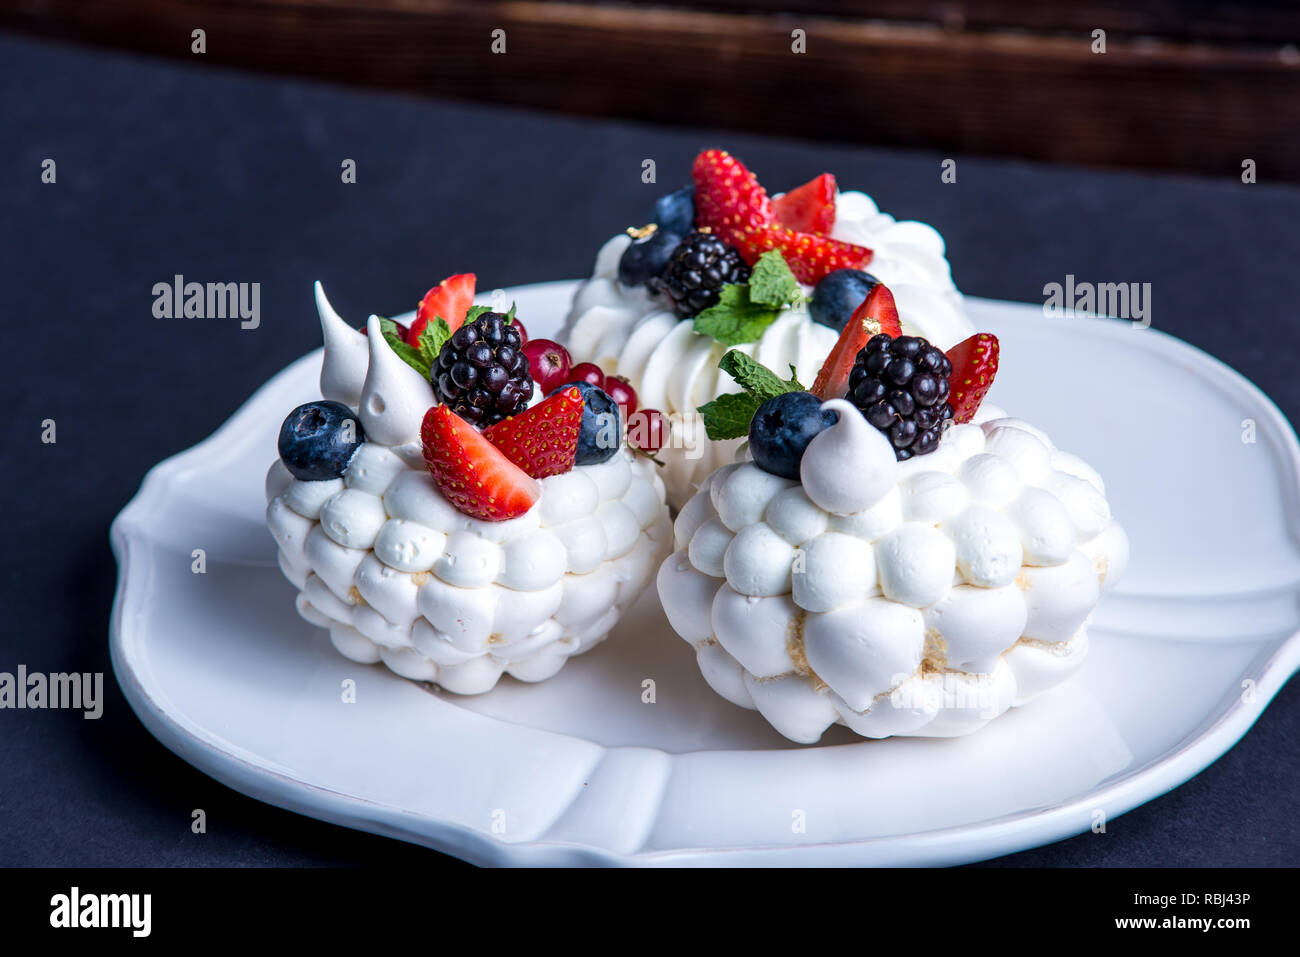 Delicate white meringues with fresh berries on the plate. Dessert Pavlova close-up. Dark background. A festive wedding cake. Stock Photo